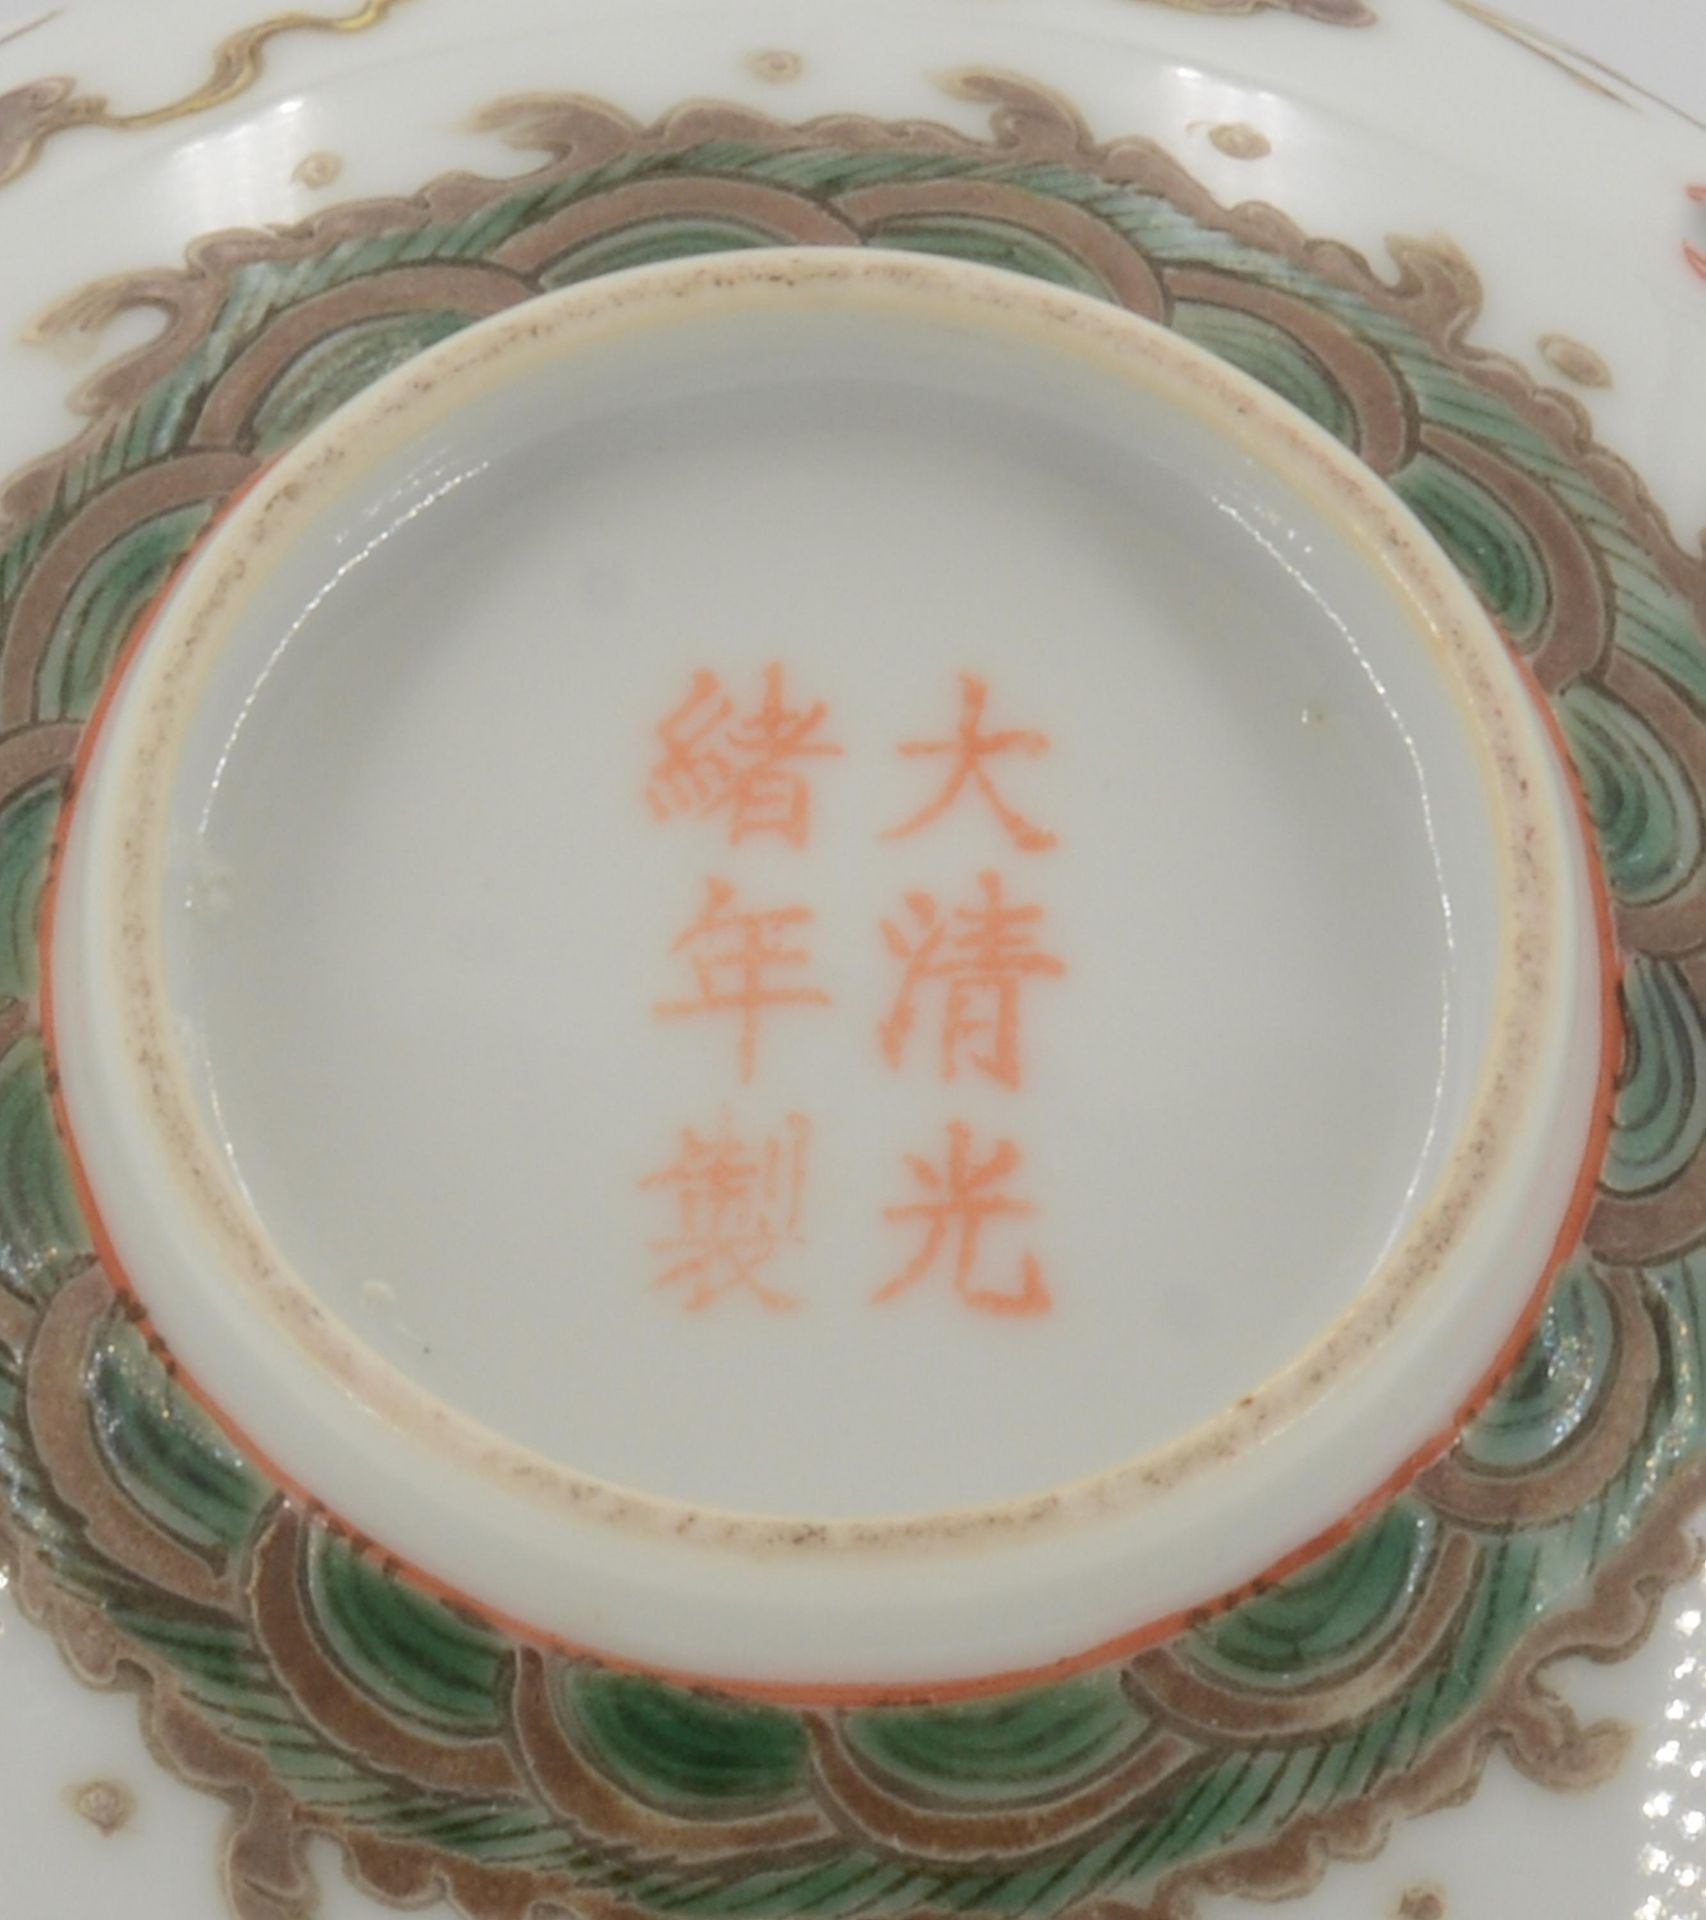 LOT OF SIX PORCELAIN PIECES. Origin: China. Dynasty: Qing dynasty and later. Date: 18th-20th c. - Bild 4 aus 9